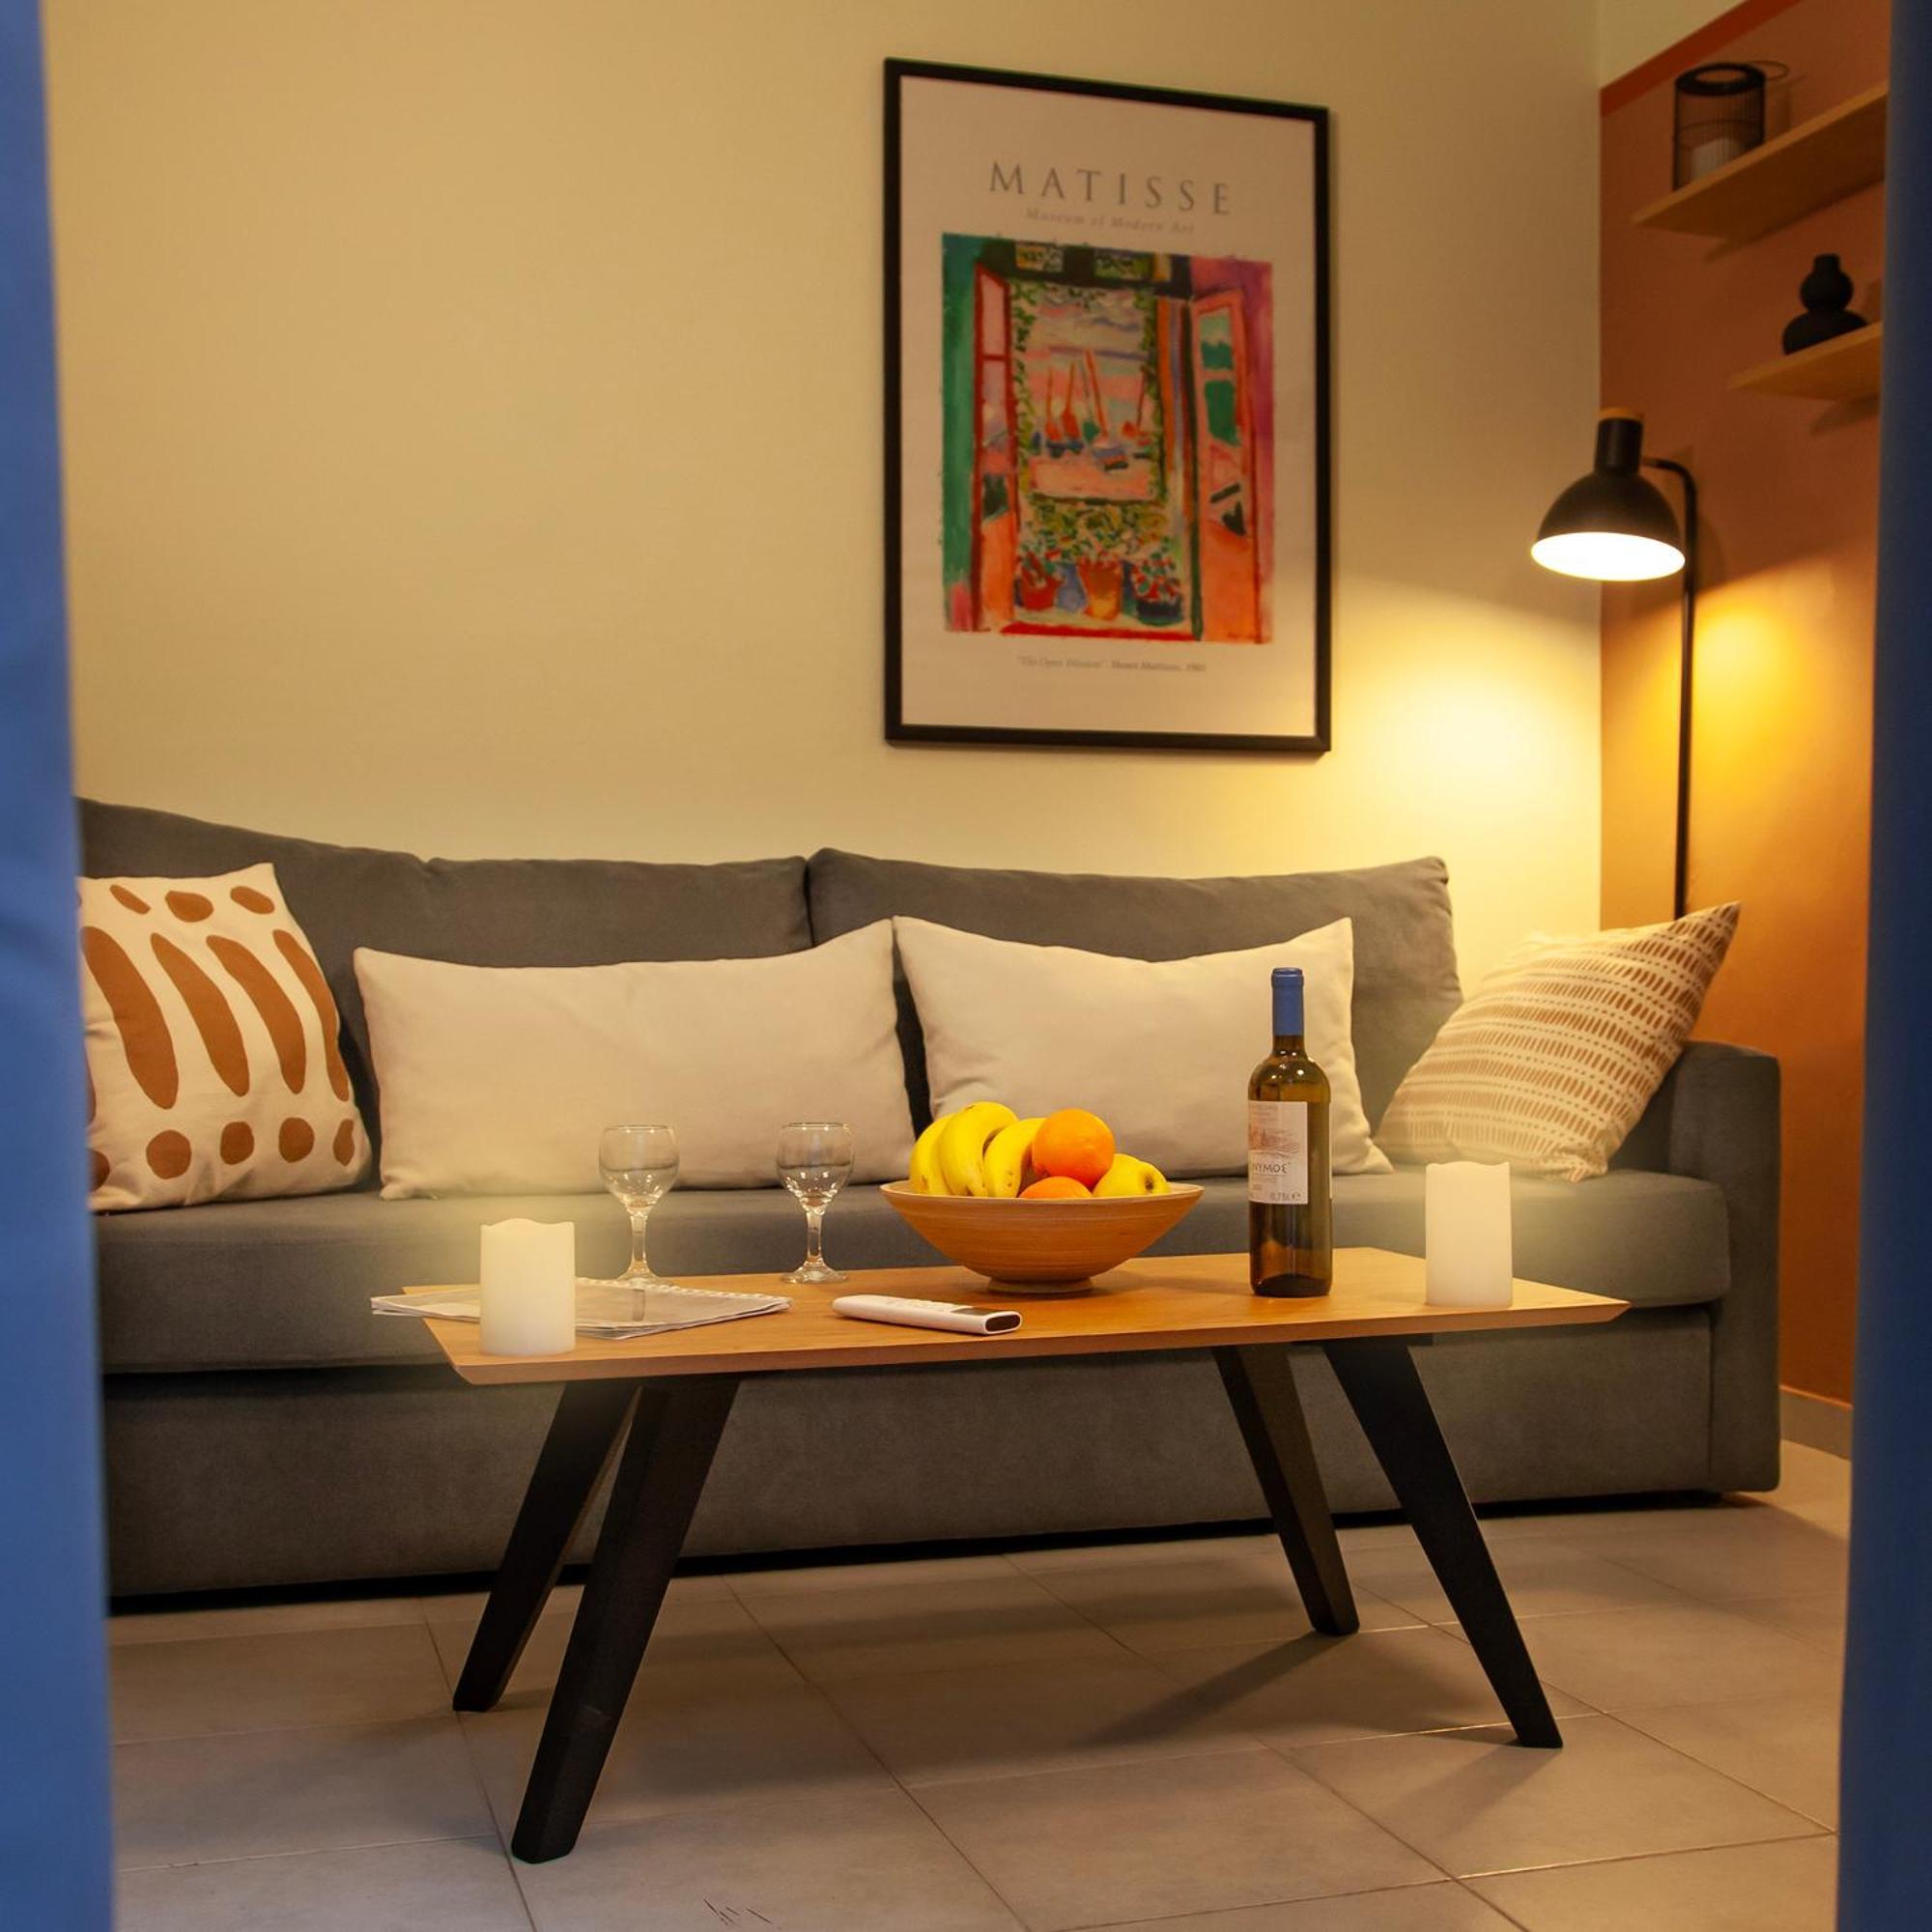 Aris123 By Smart Cozy Suites - Apartments In The Heart Of Athens - 5 Minutes From Metro - Available 24Hr Exterior foto